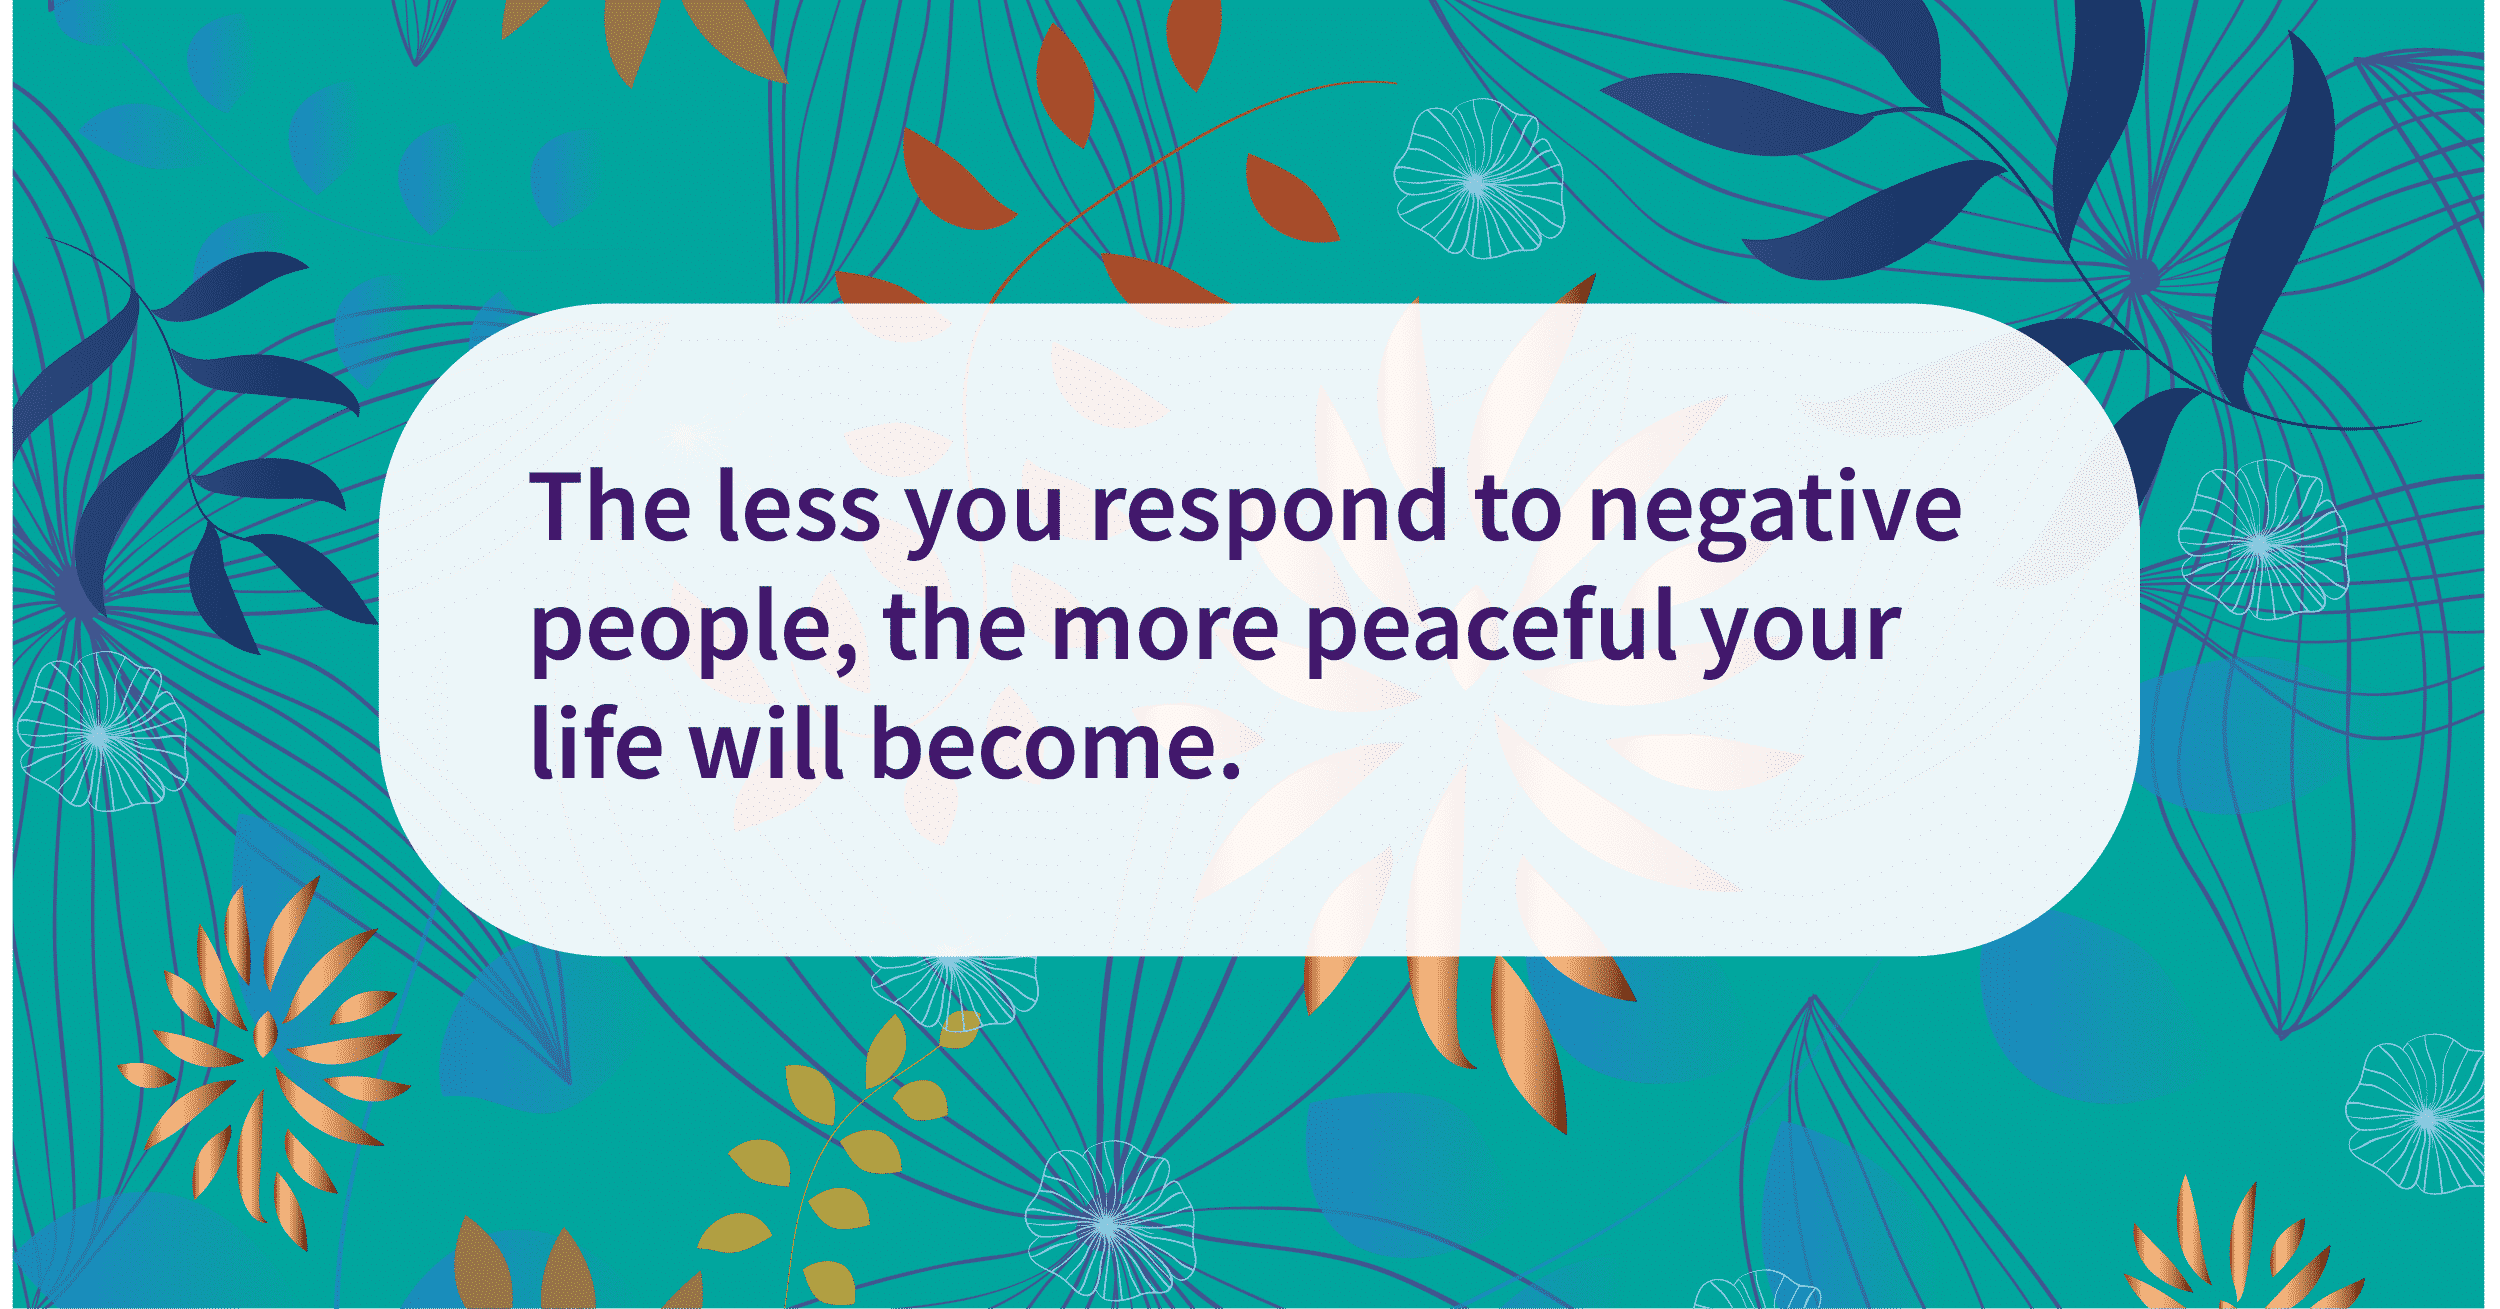 how to respond to negative people